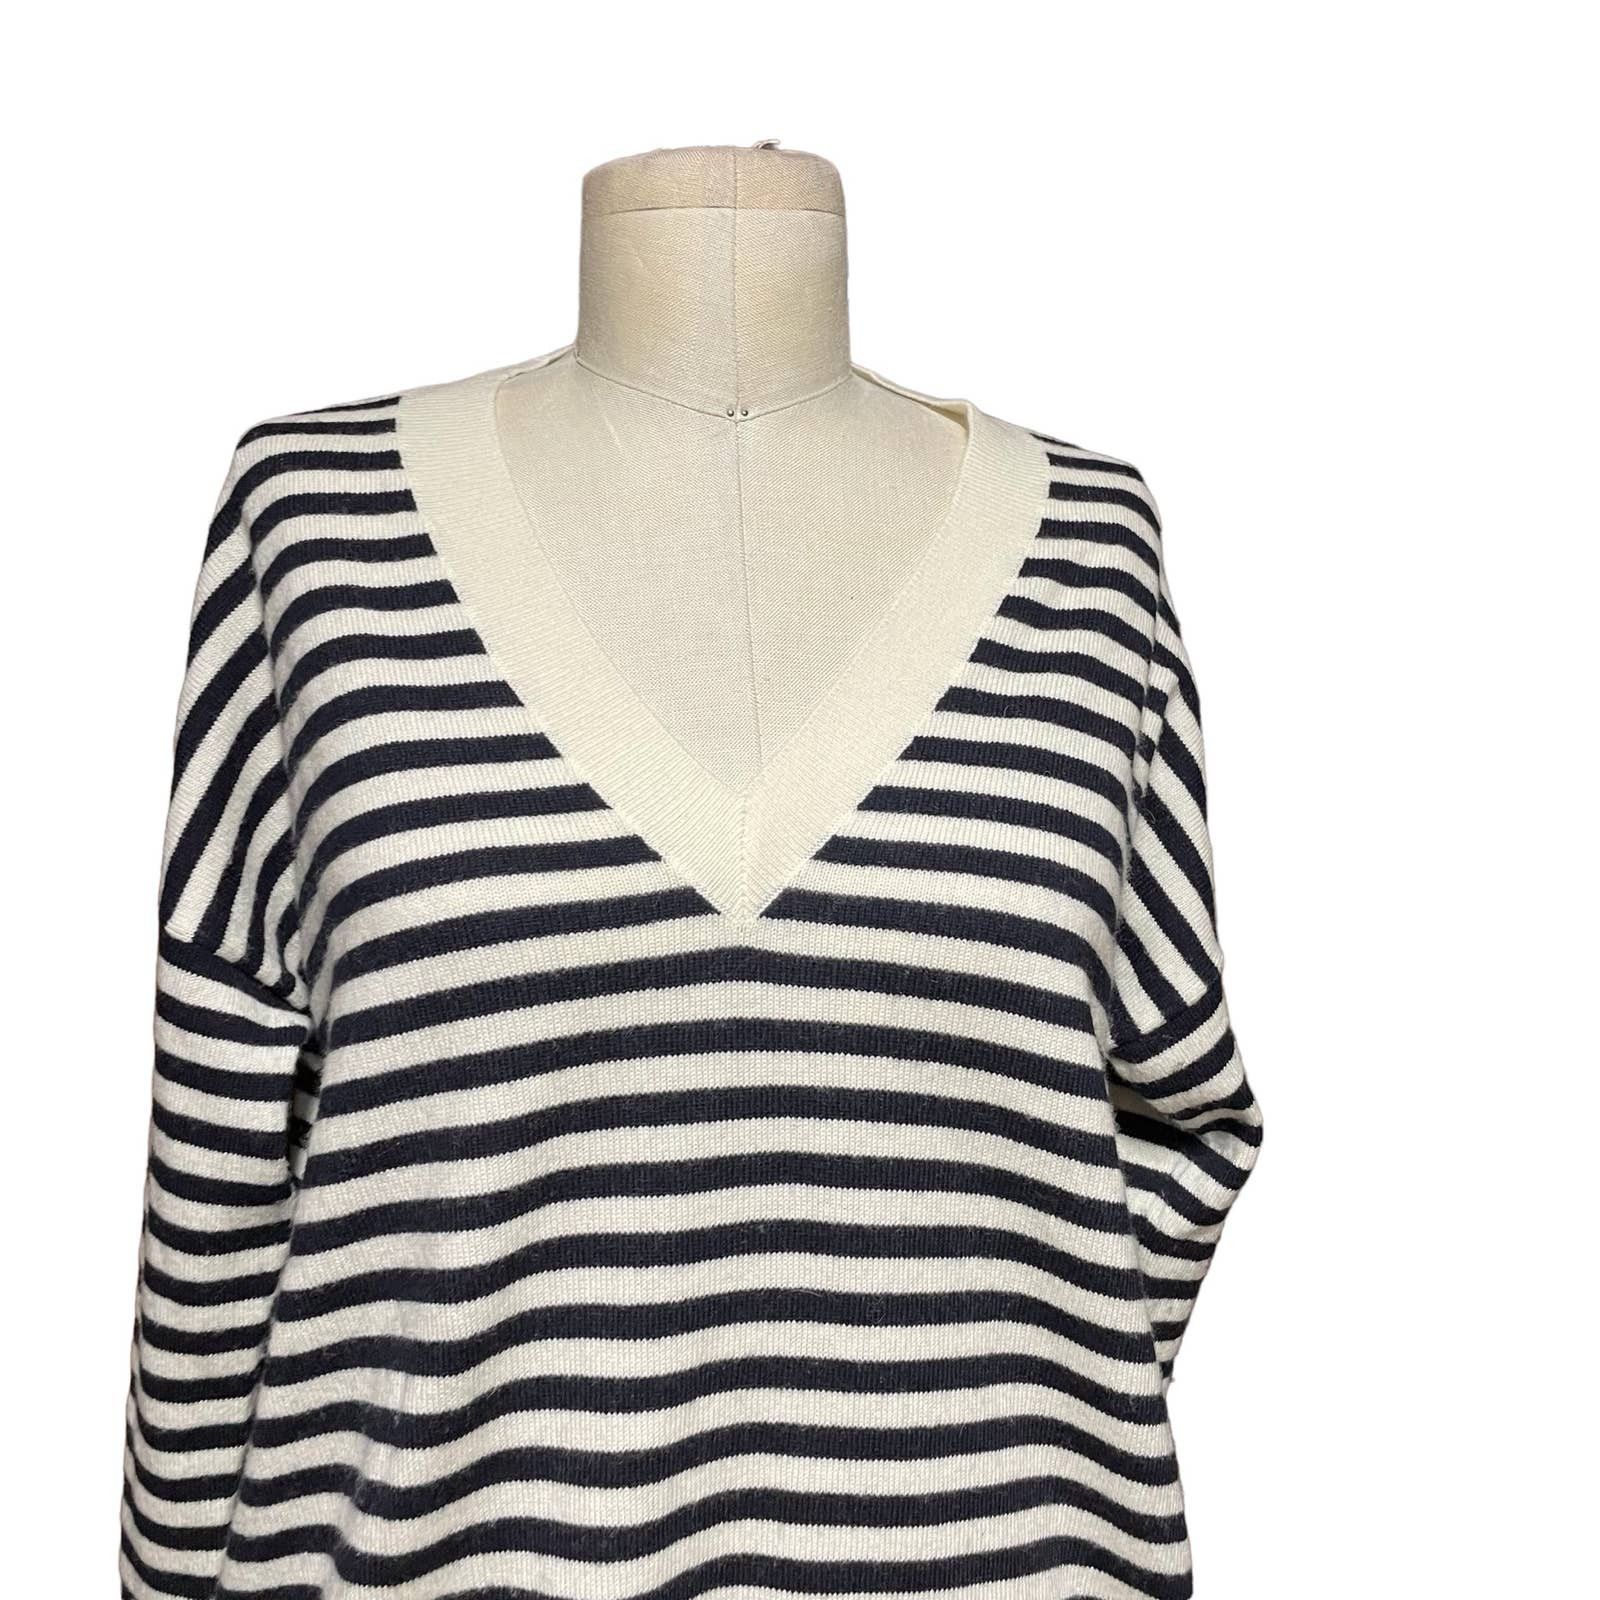 Chinti and Parker Chinti & Parker Navy Blue Cream Stripe Wool Cashmere Sweater Size M / US 6-8 / IT 42-44 - 2 Preview